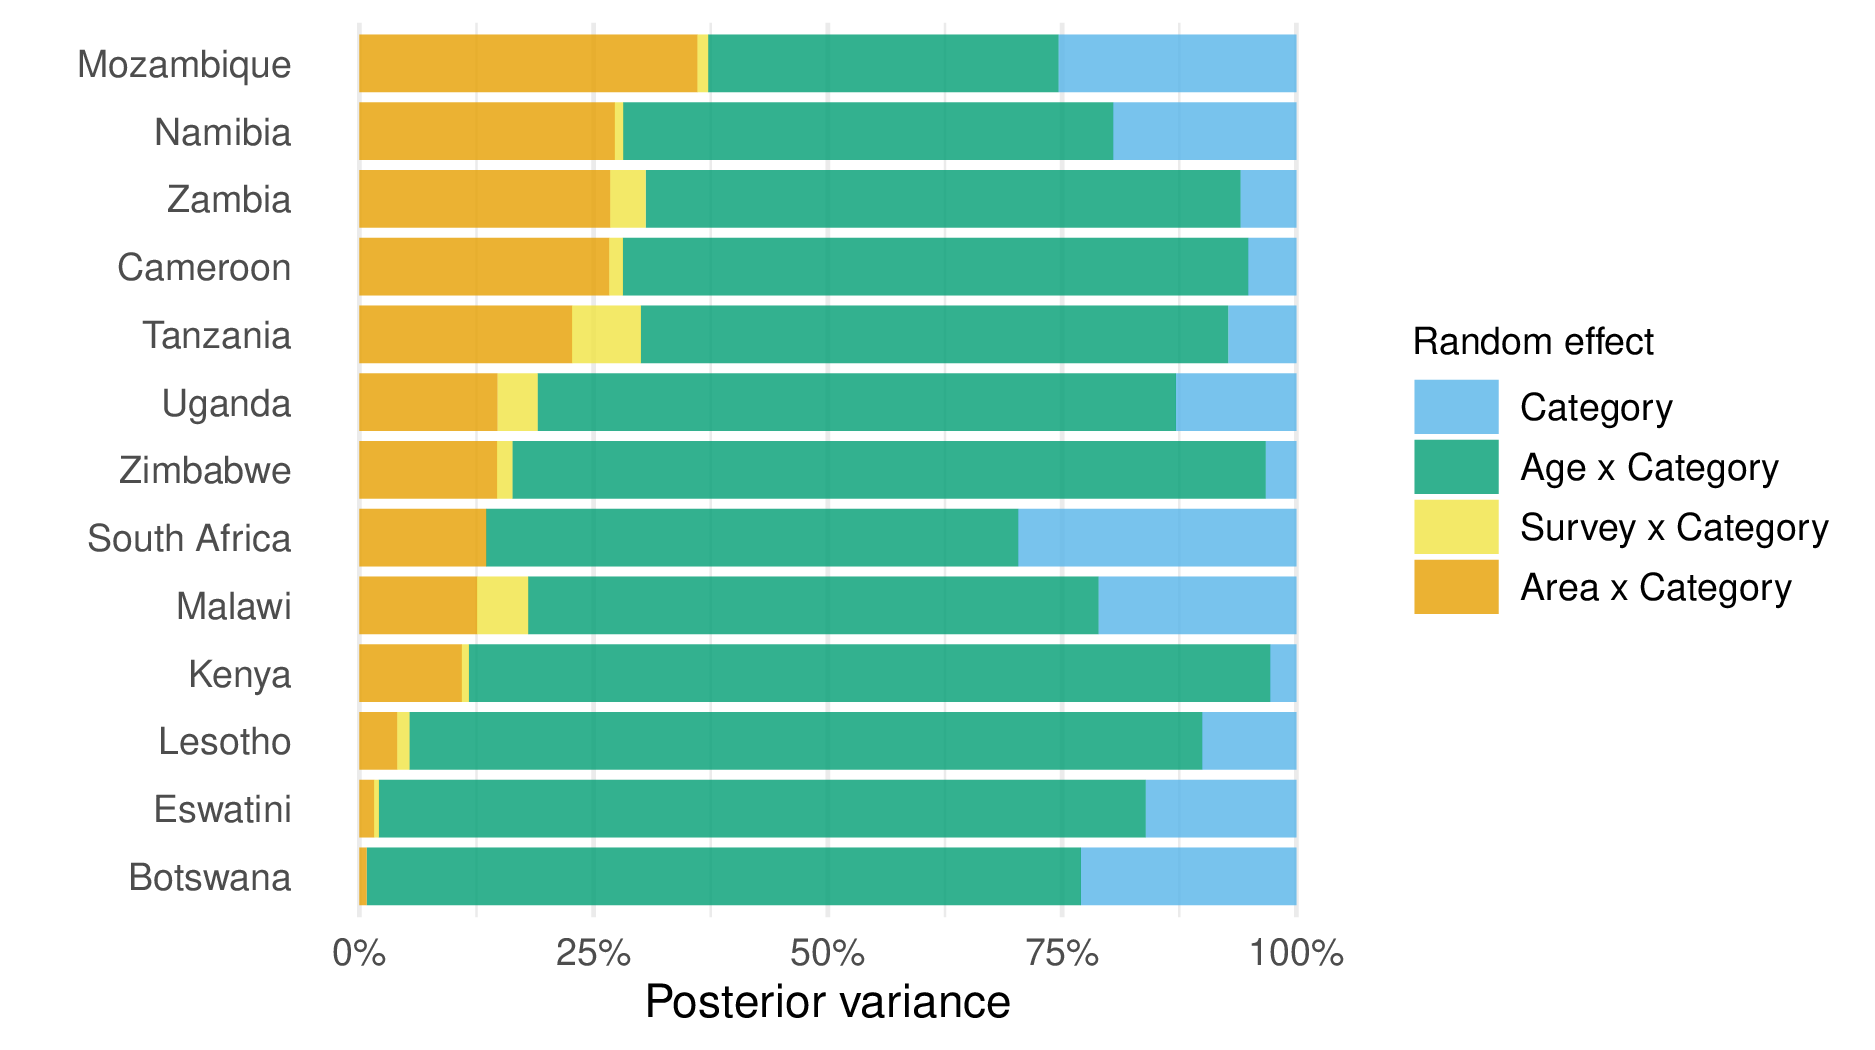 The proportion of posterior variance in risk group proporitons explained by each random effect. To get this right, care was required with sum-to-zero constraints to make sure each random effect was only doing the job it was intended to do.